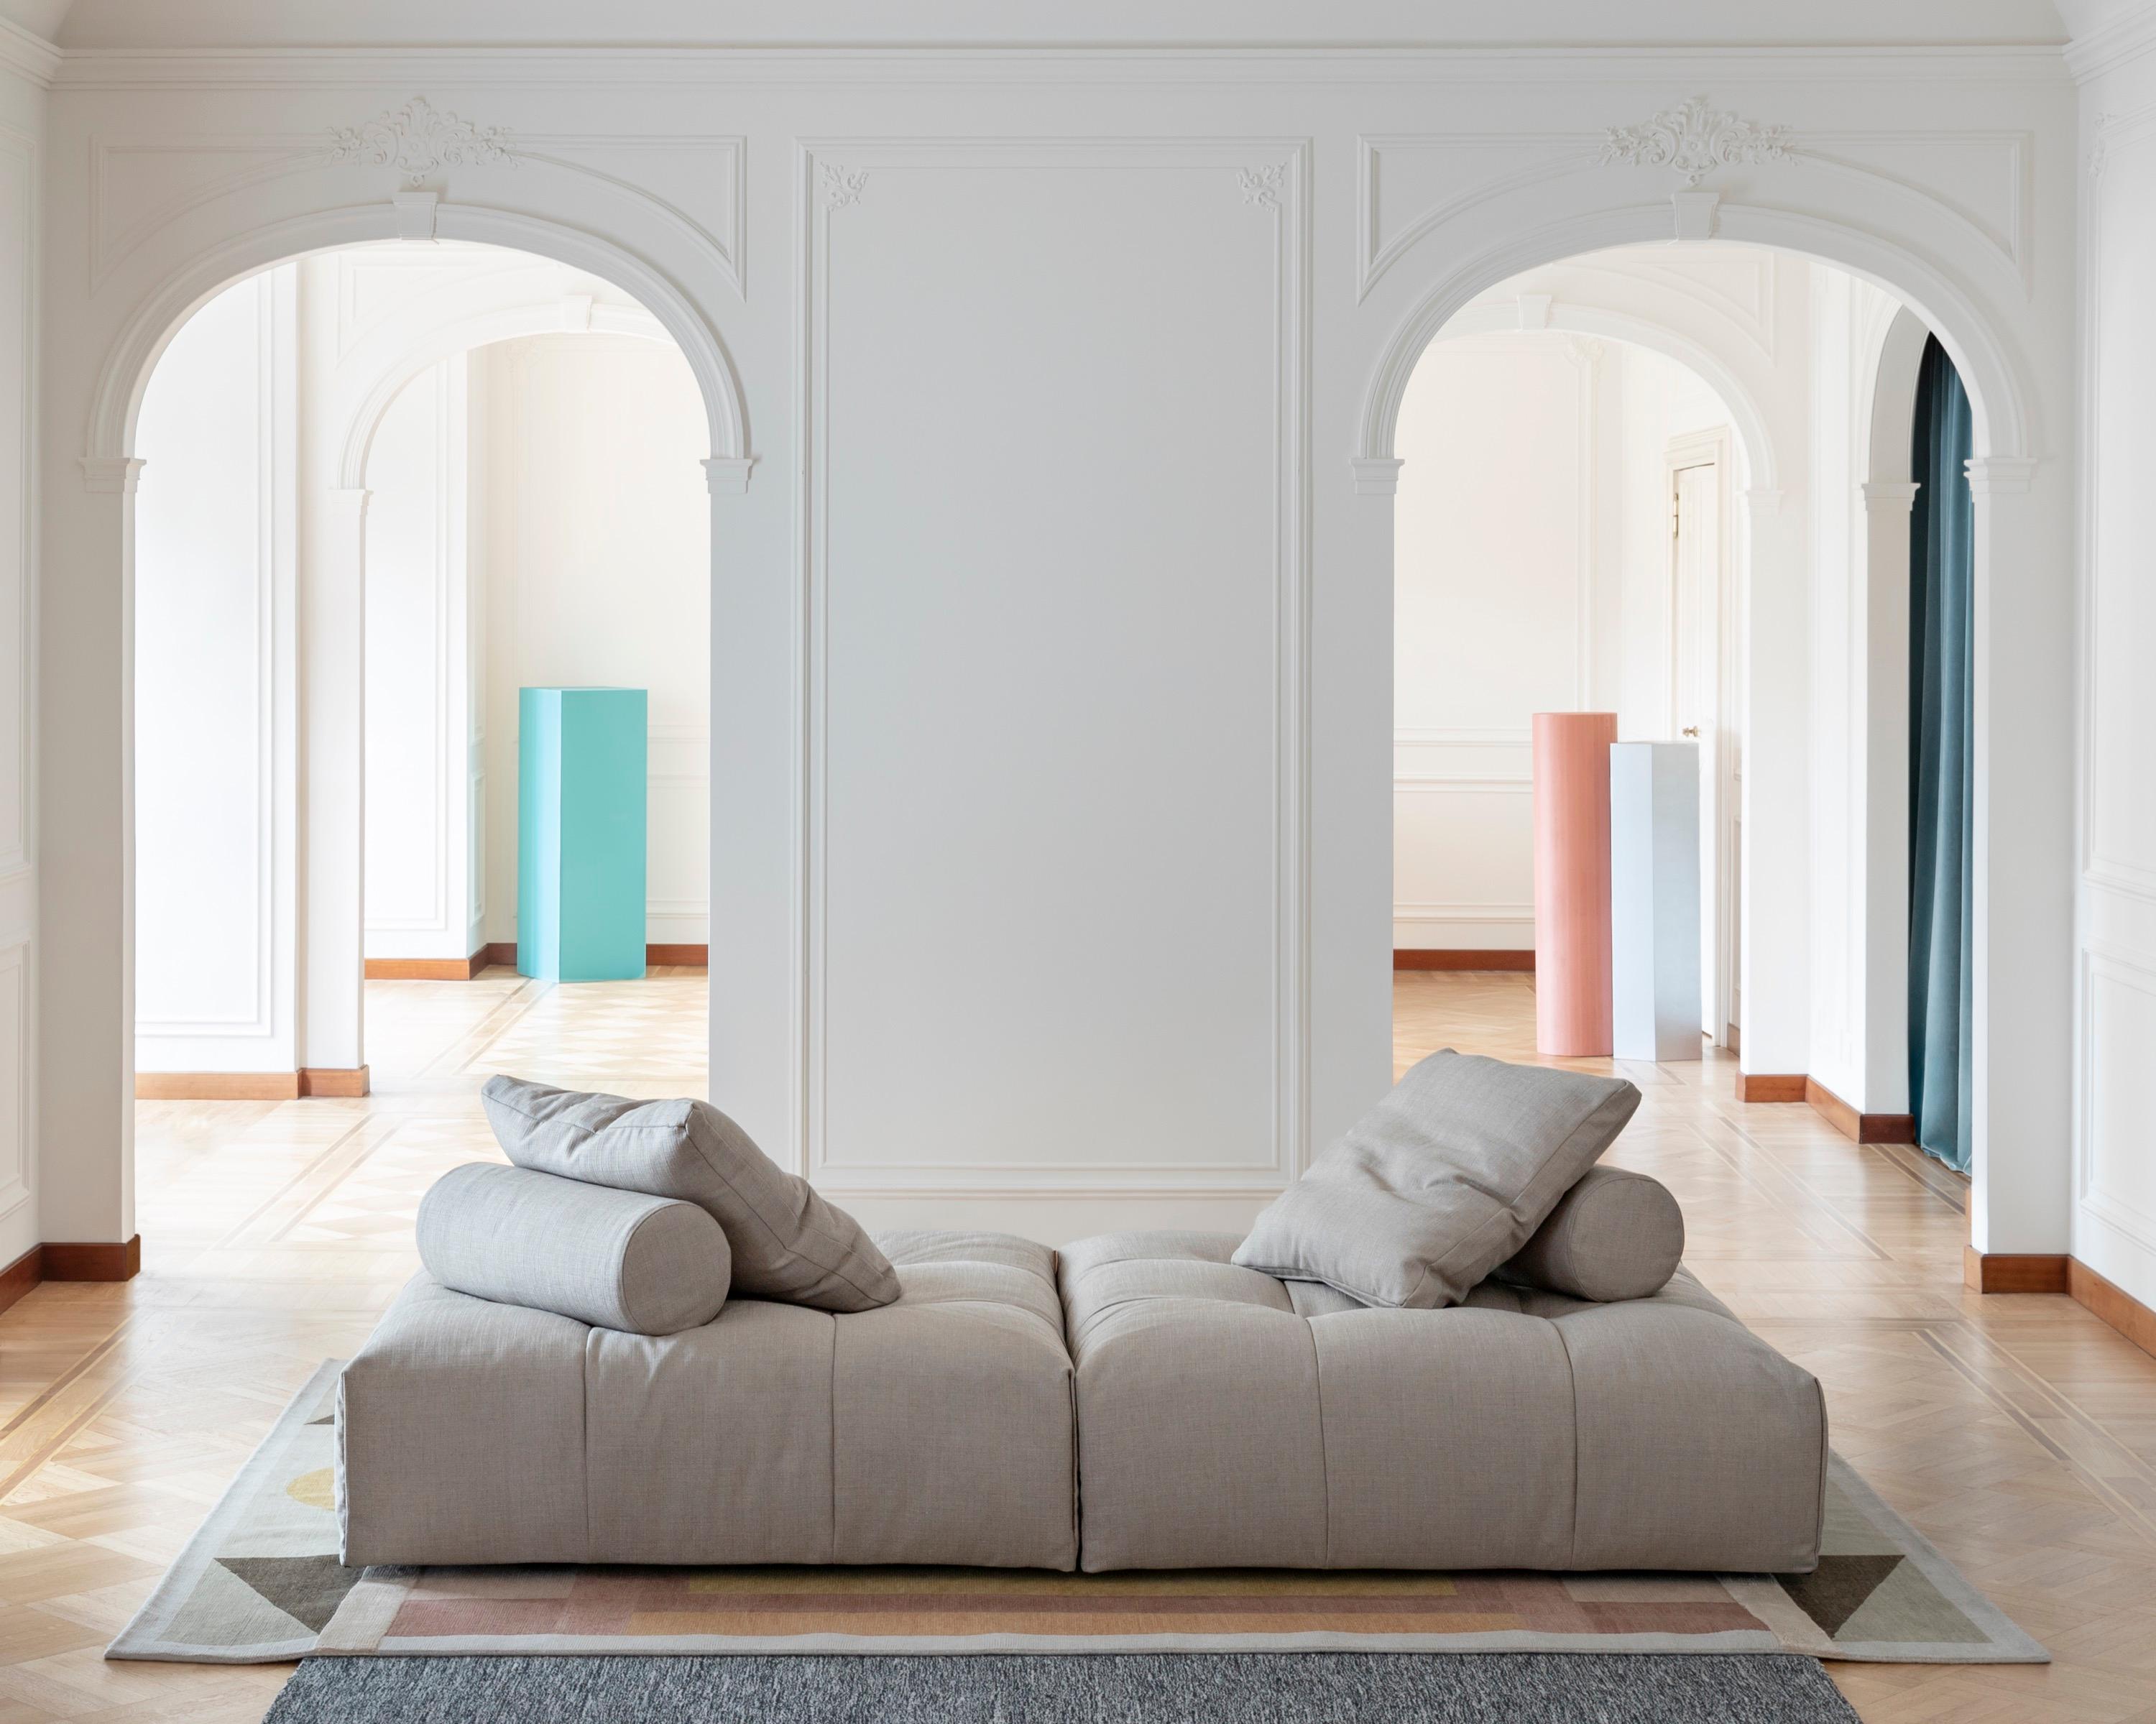 From the creativity of Sergio Bicego comes Pixel sofa, featuring a series of elements that can be freely combined, thanks to an exclusive connector created by Saba Italia. In this way the arm- and backrests can be removed from the bases to form